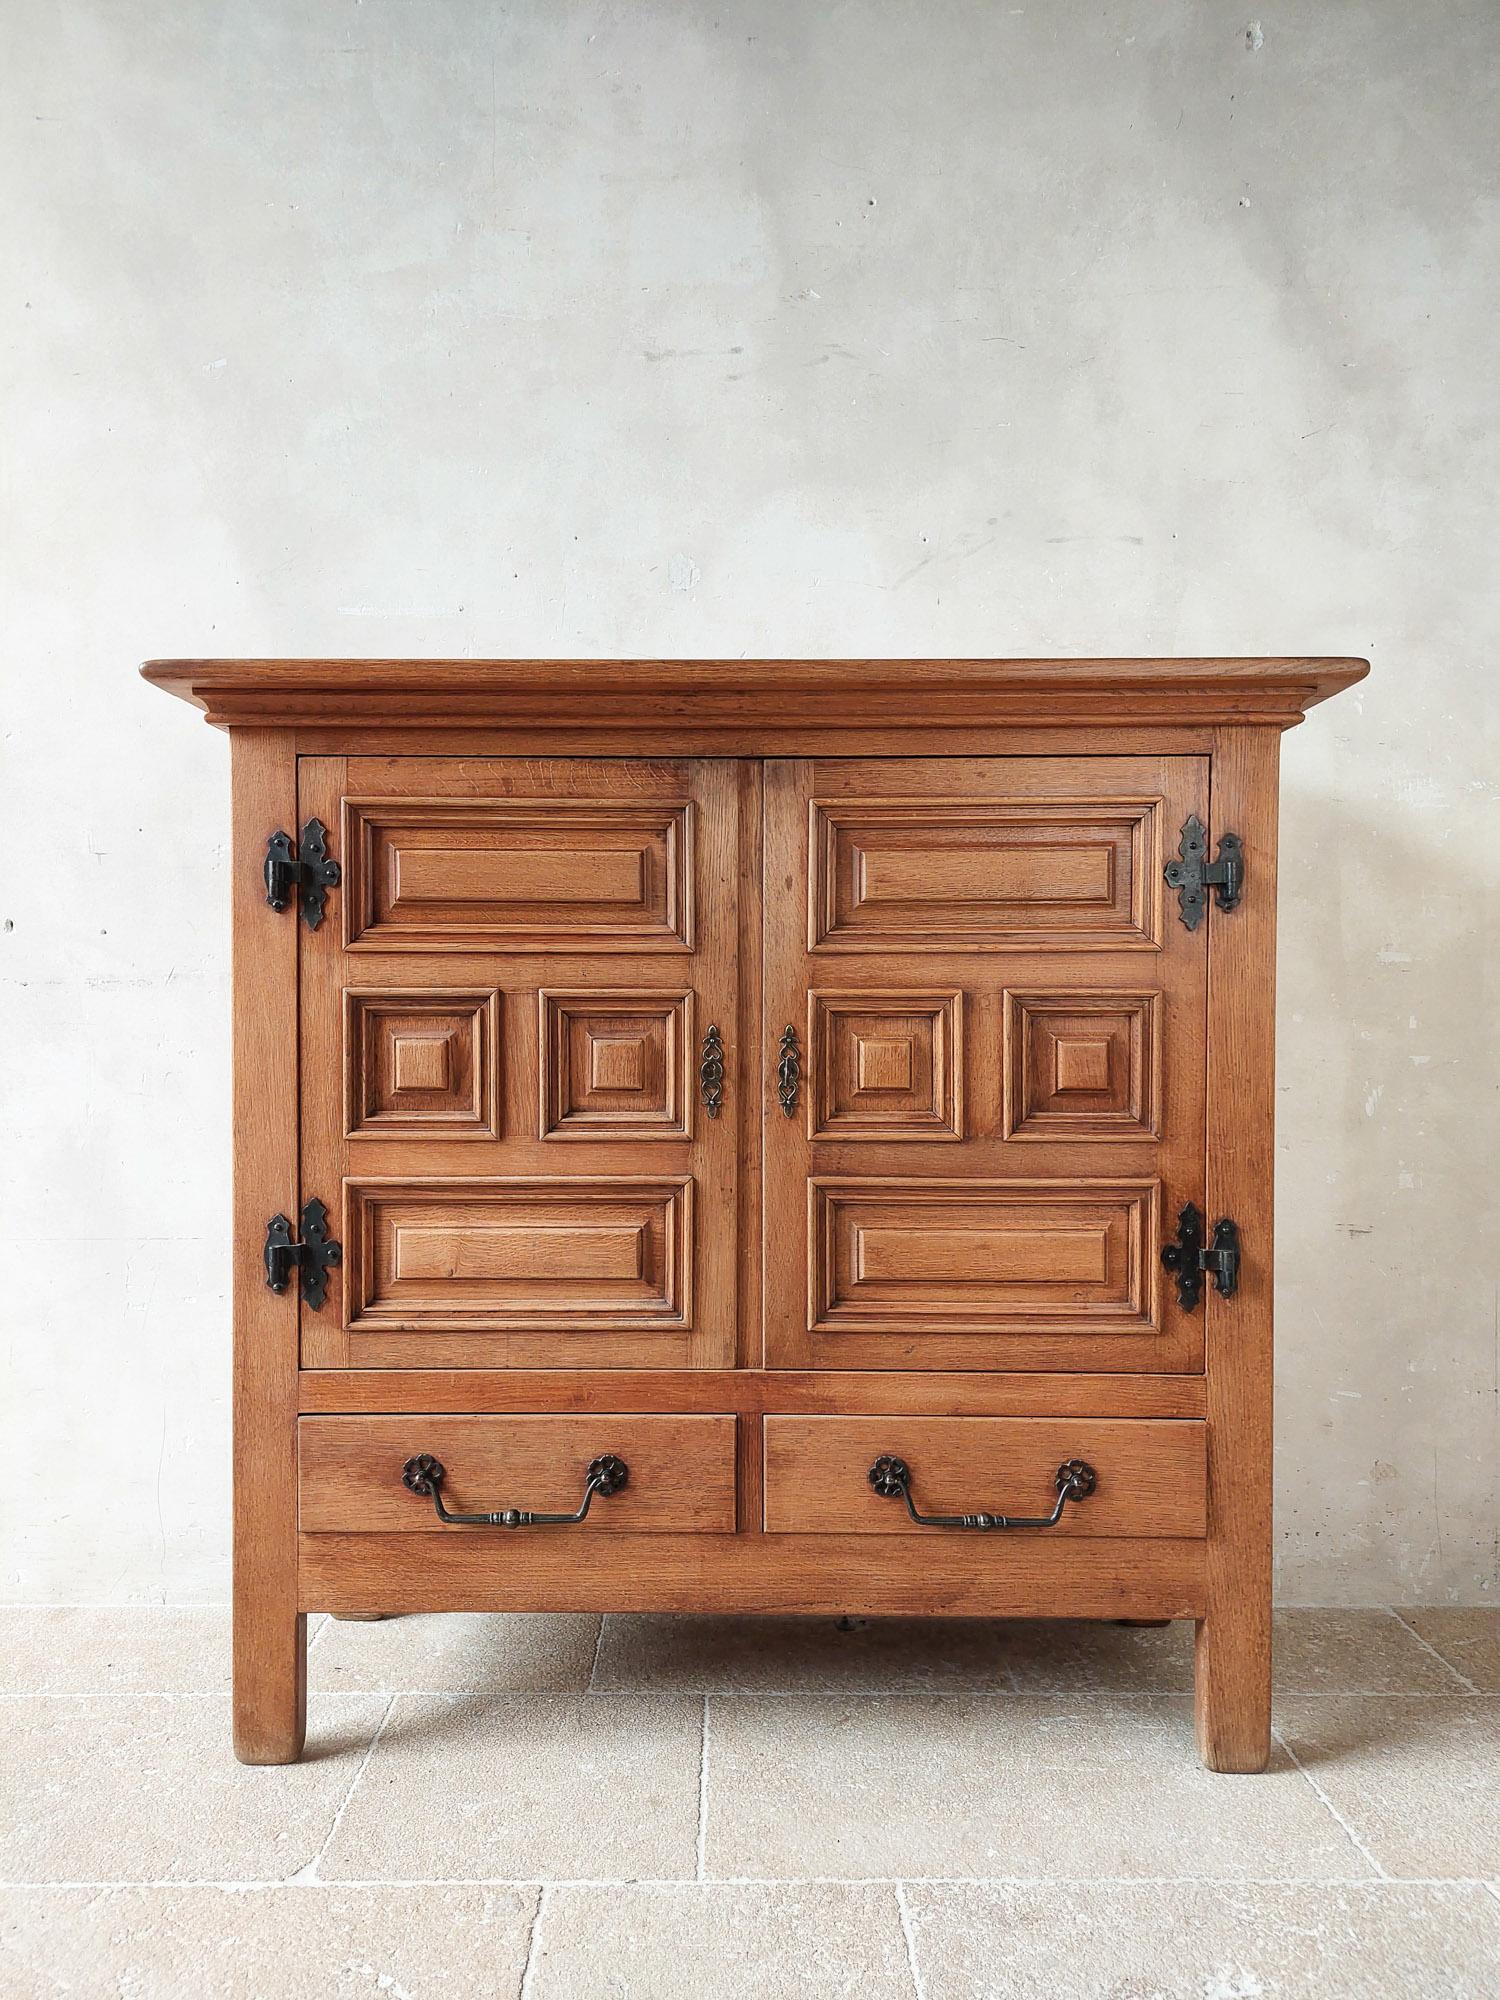 Mid-century Spanish oak cabinet, 1950s. Beautiful solid oak high sideboard in Spanish rustic modernist style. With two doors and two drawers decorated with geometric panels and wrought iron hardware. This oak 'high board' has a beautiful light brown